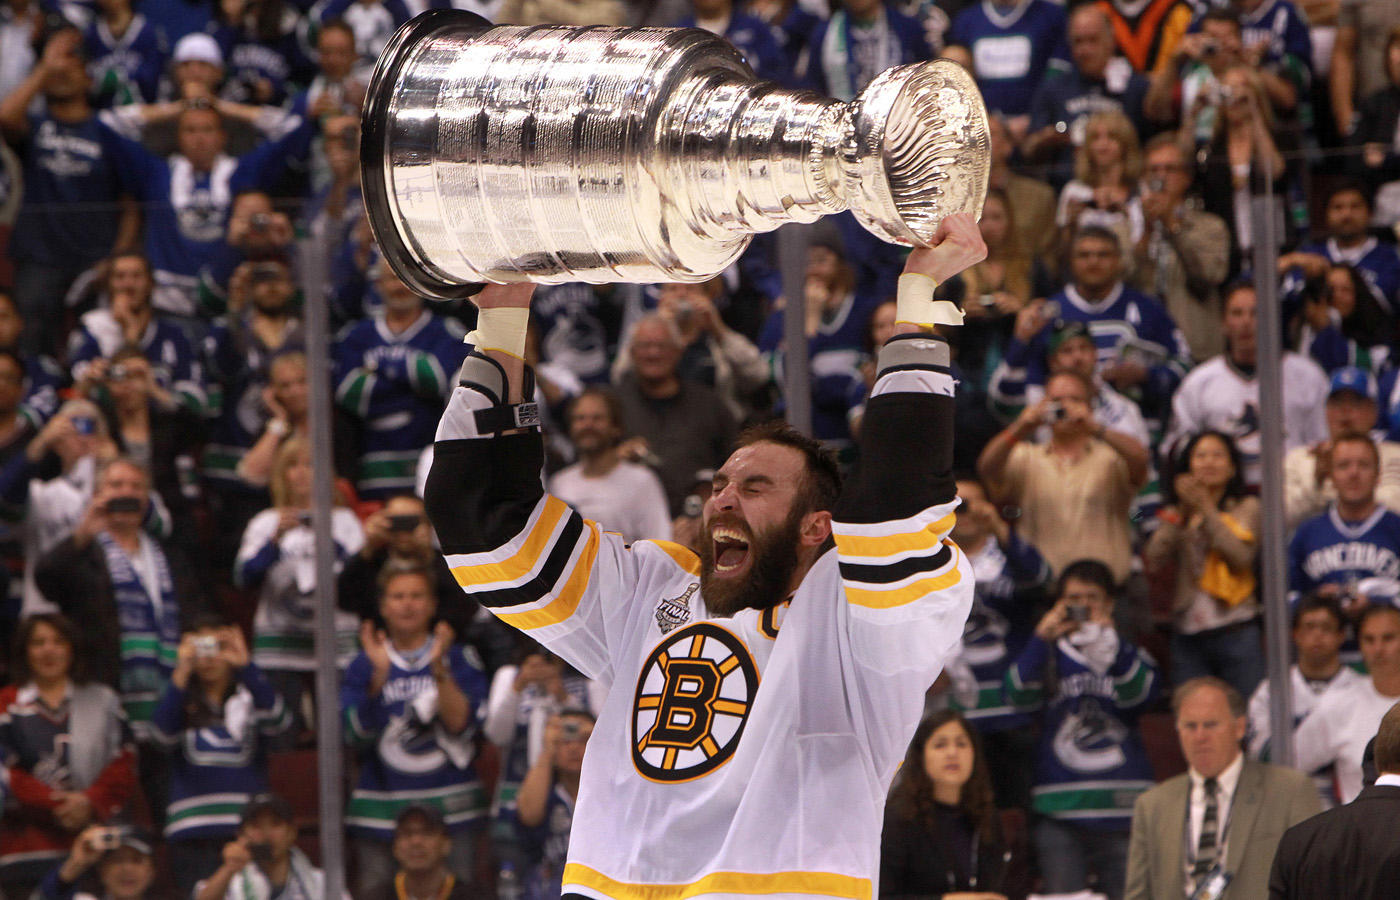 Bruins plan to honor Zdeno Chara after retirement decision